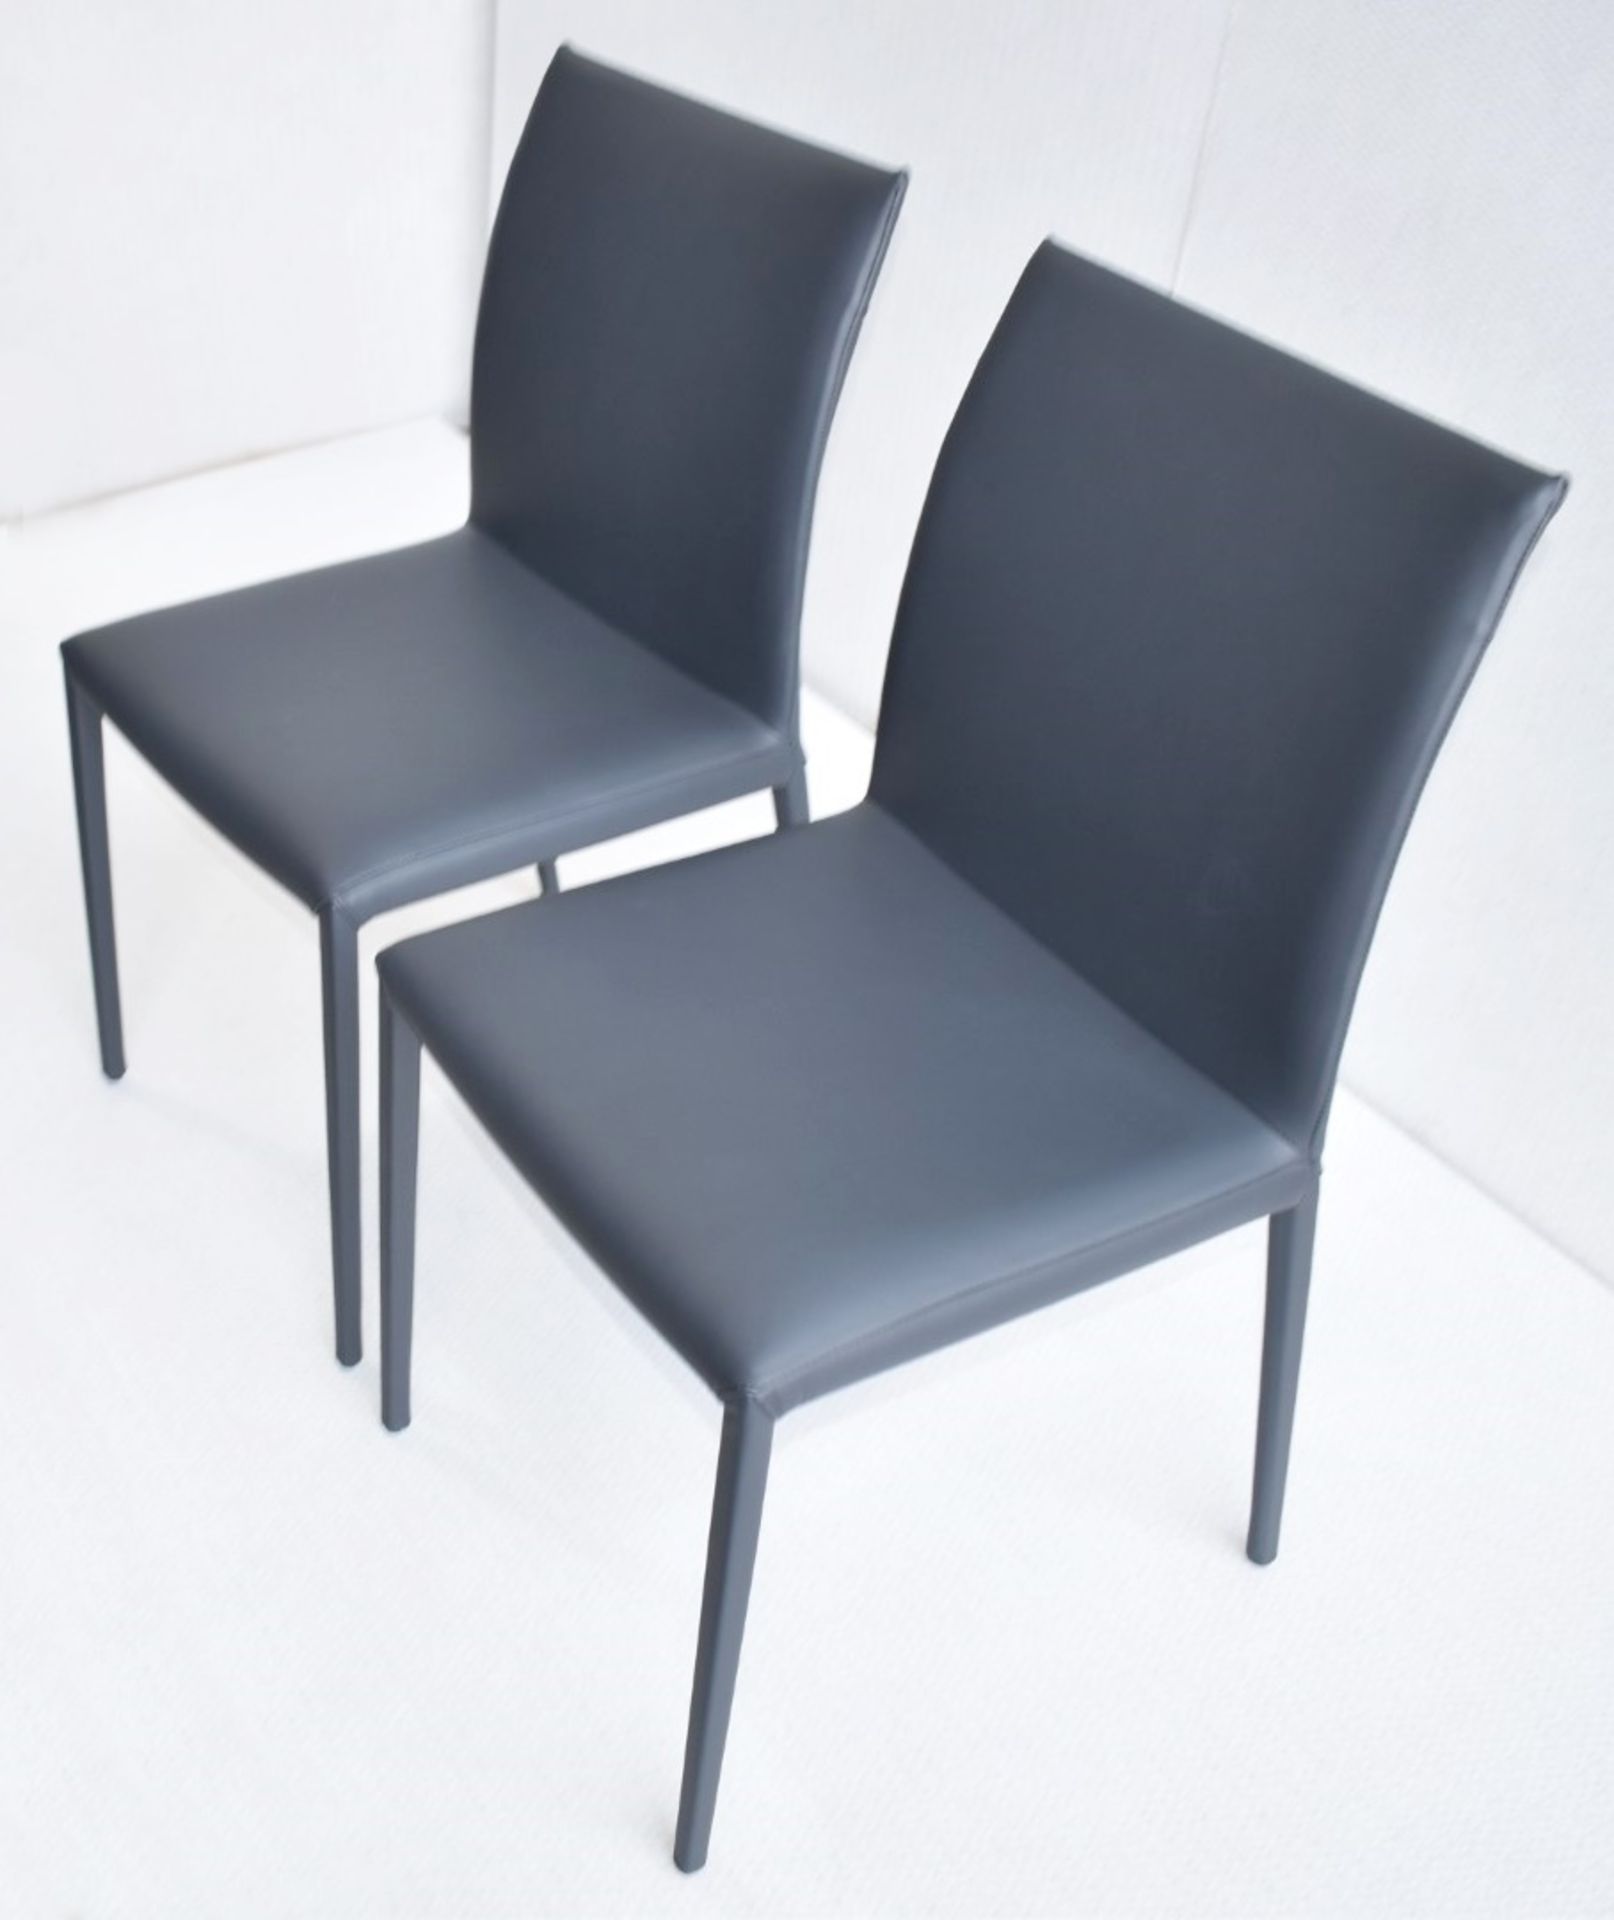 Pair of CATTELAN ITALIA Norma Designer Leather Upholstered Dining Chairs - Original Price £1,258 - Image 2 of 7